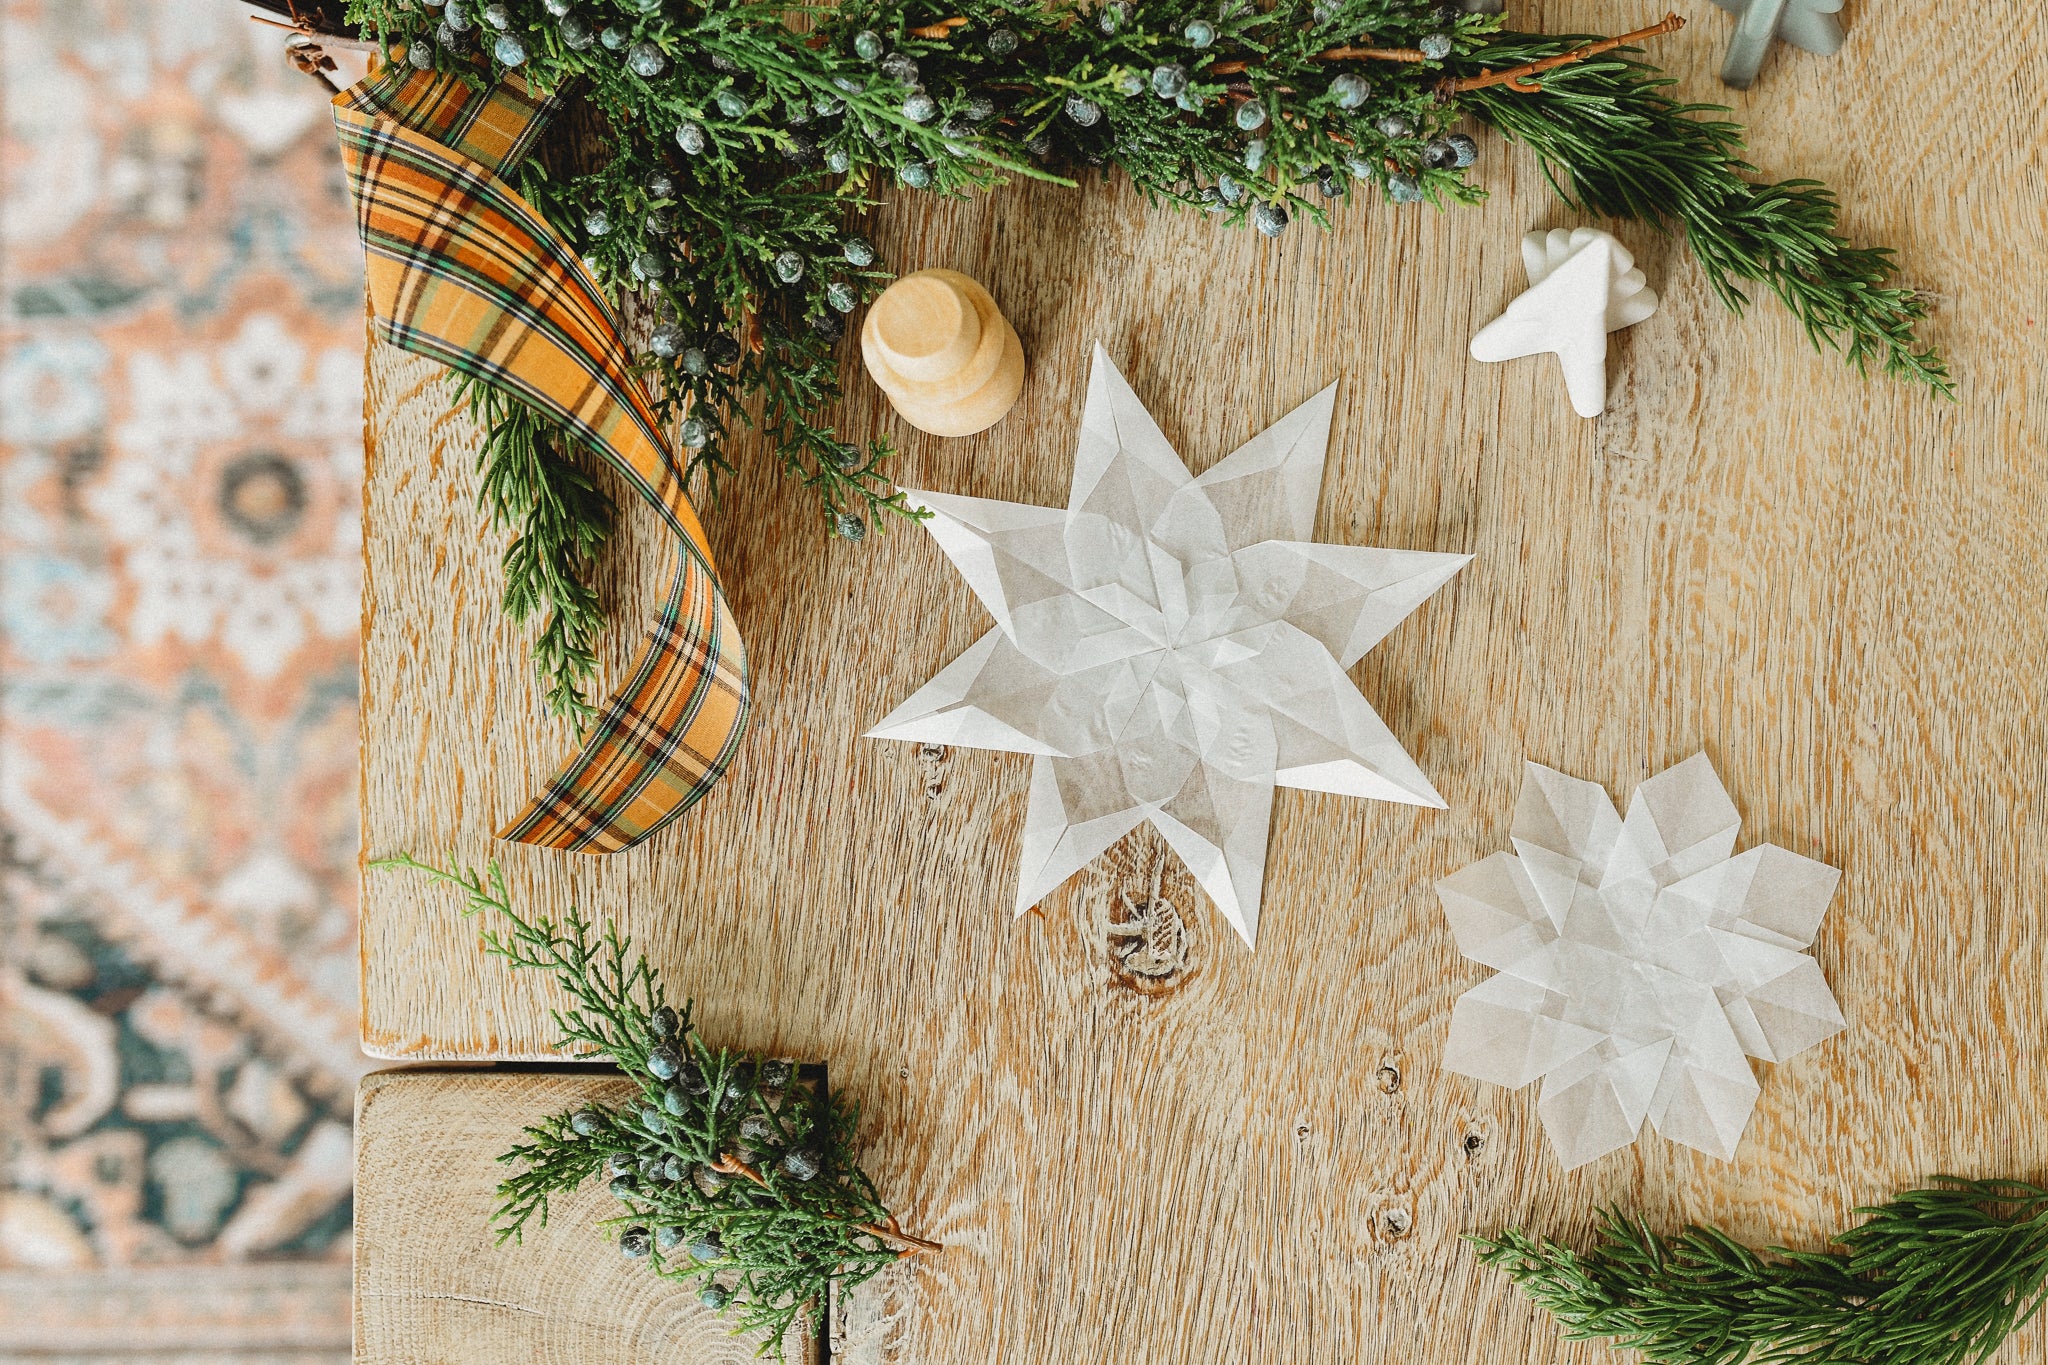 A kite paper snowflake sits on a pine table with fresh pine and ribbon.